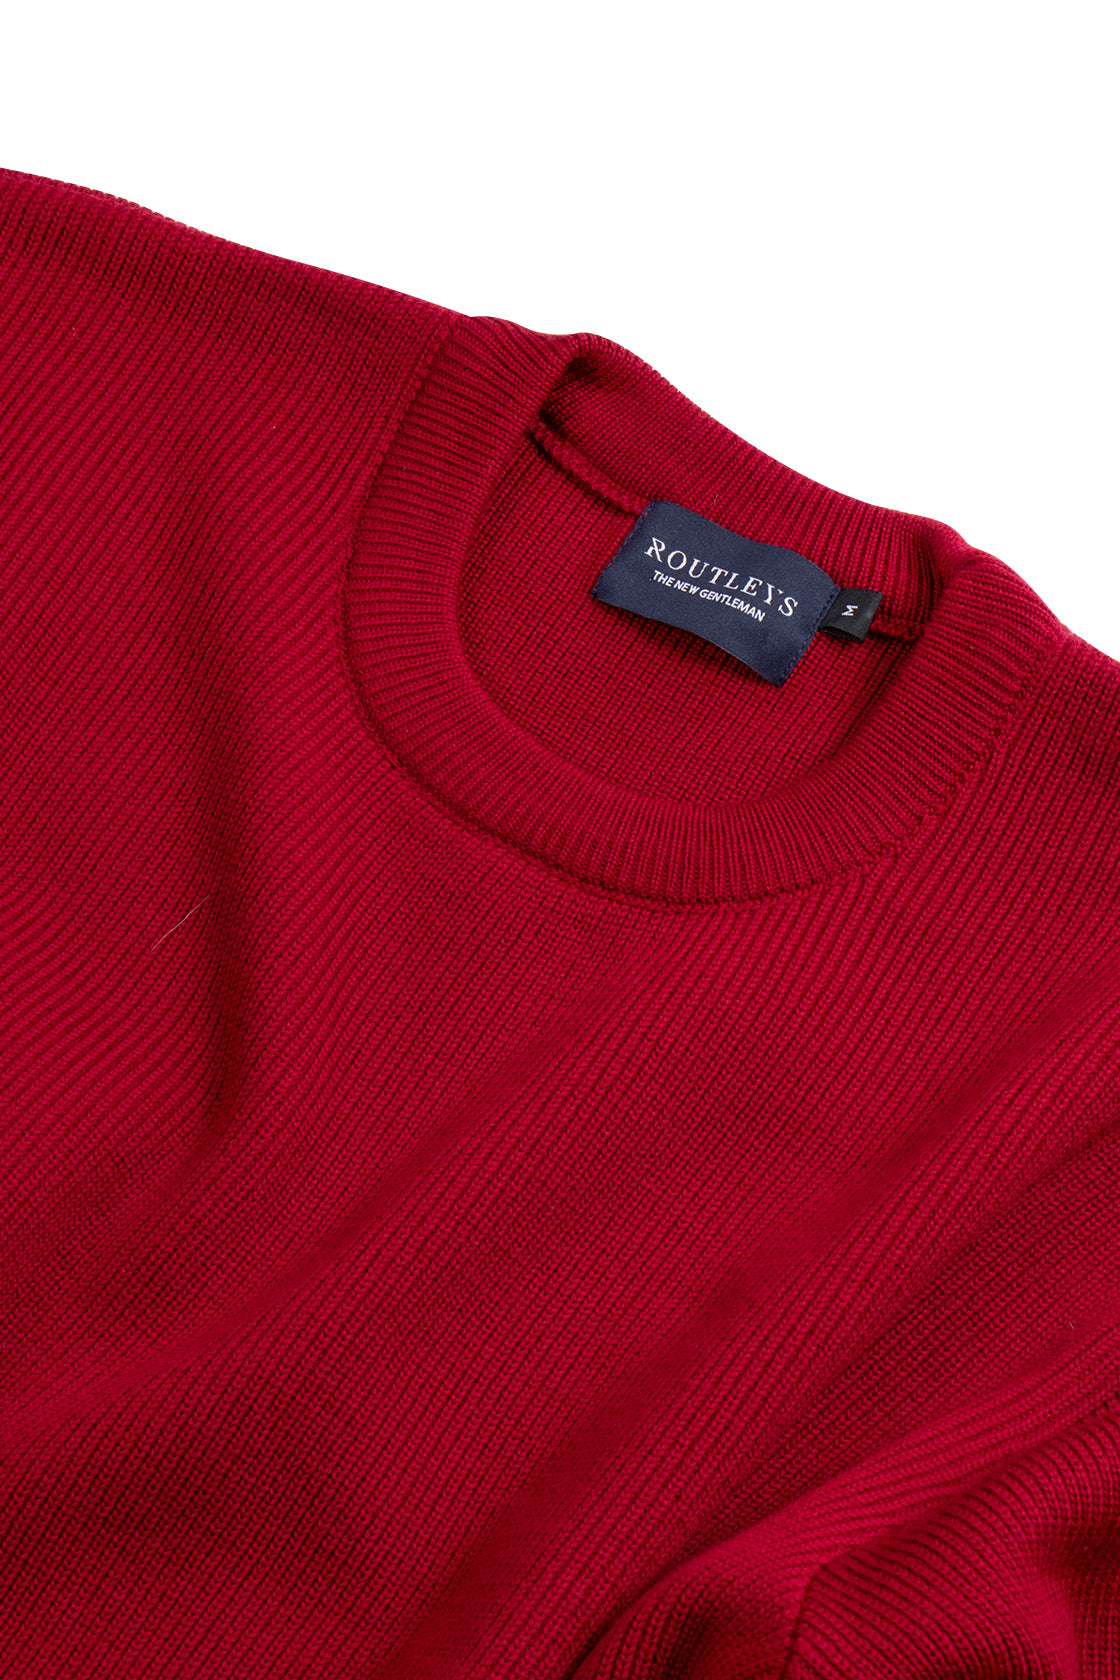 Routleys Fishermans Rib Crew Sweater Red